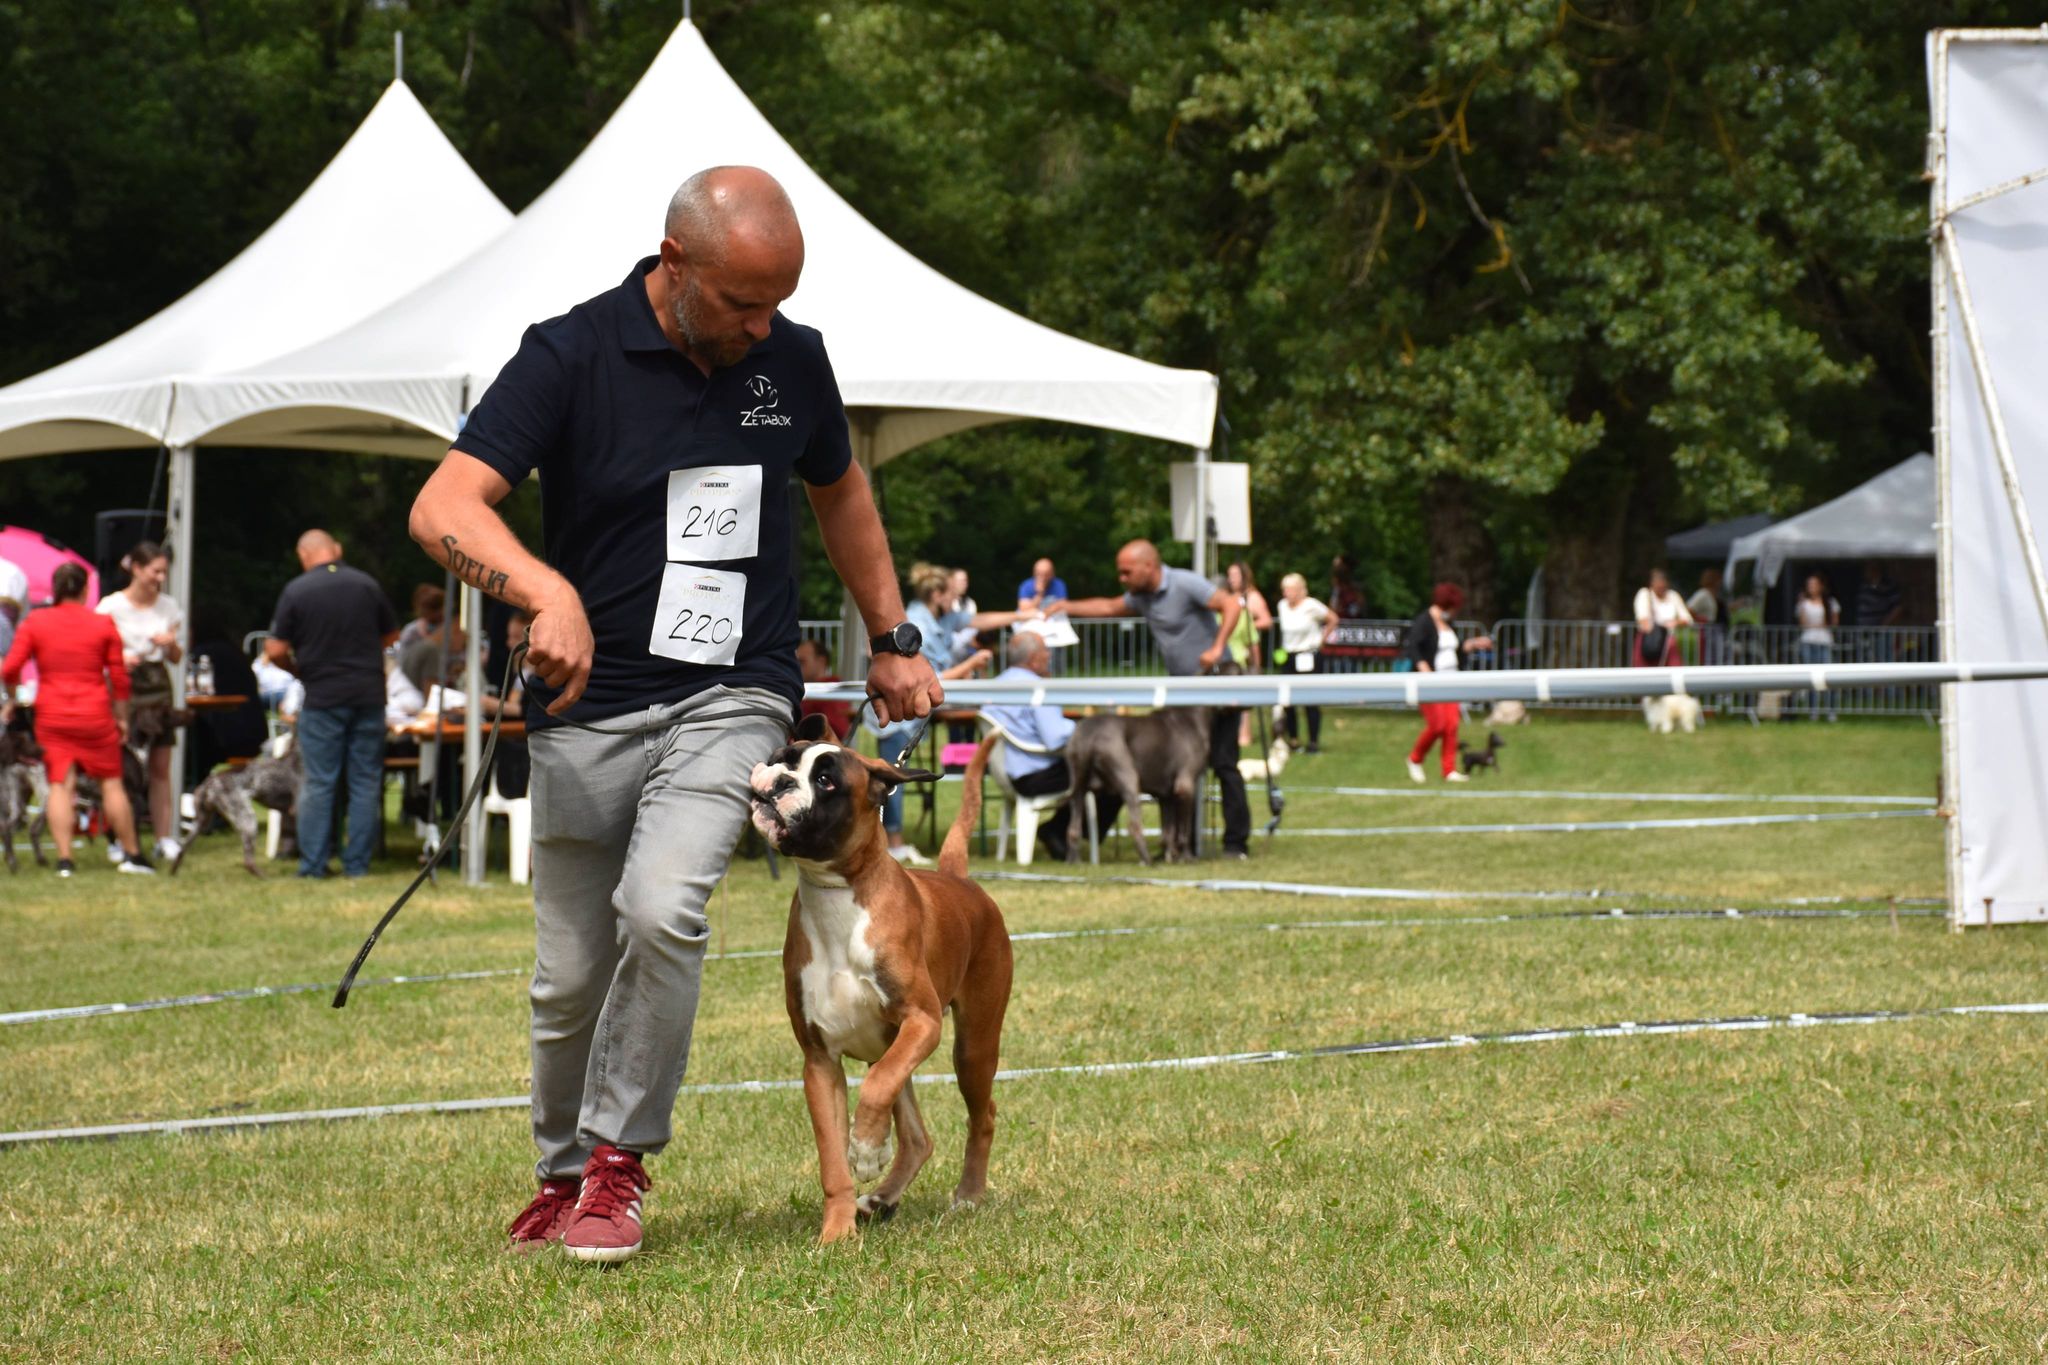 A man holds a leash and runs in a circle with a yellow dog looking him in the eye